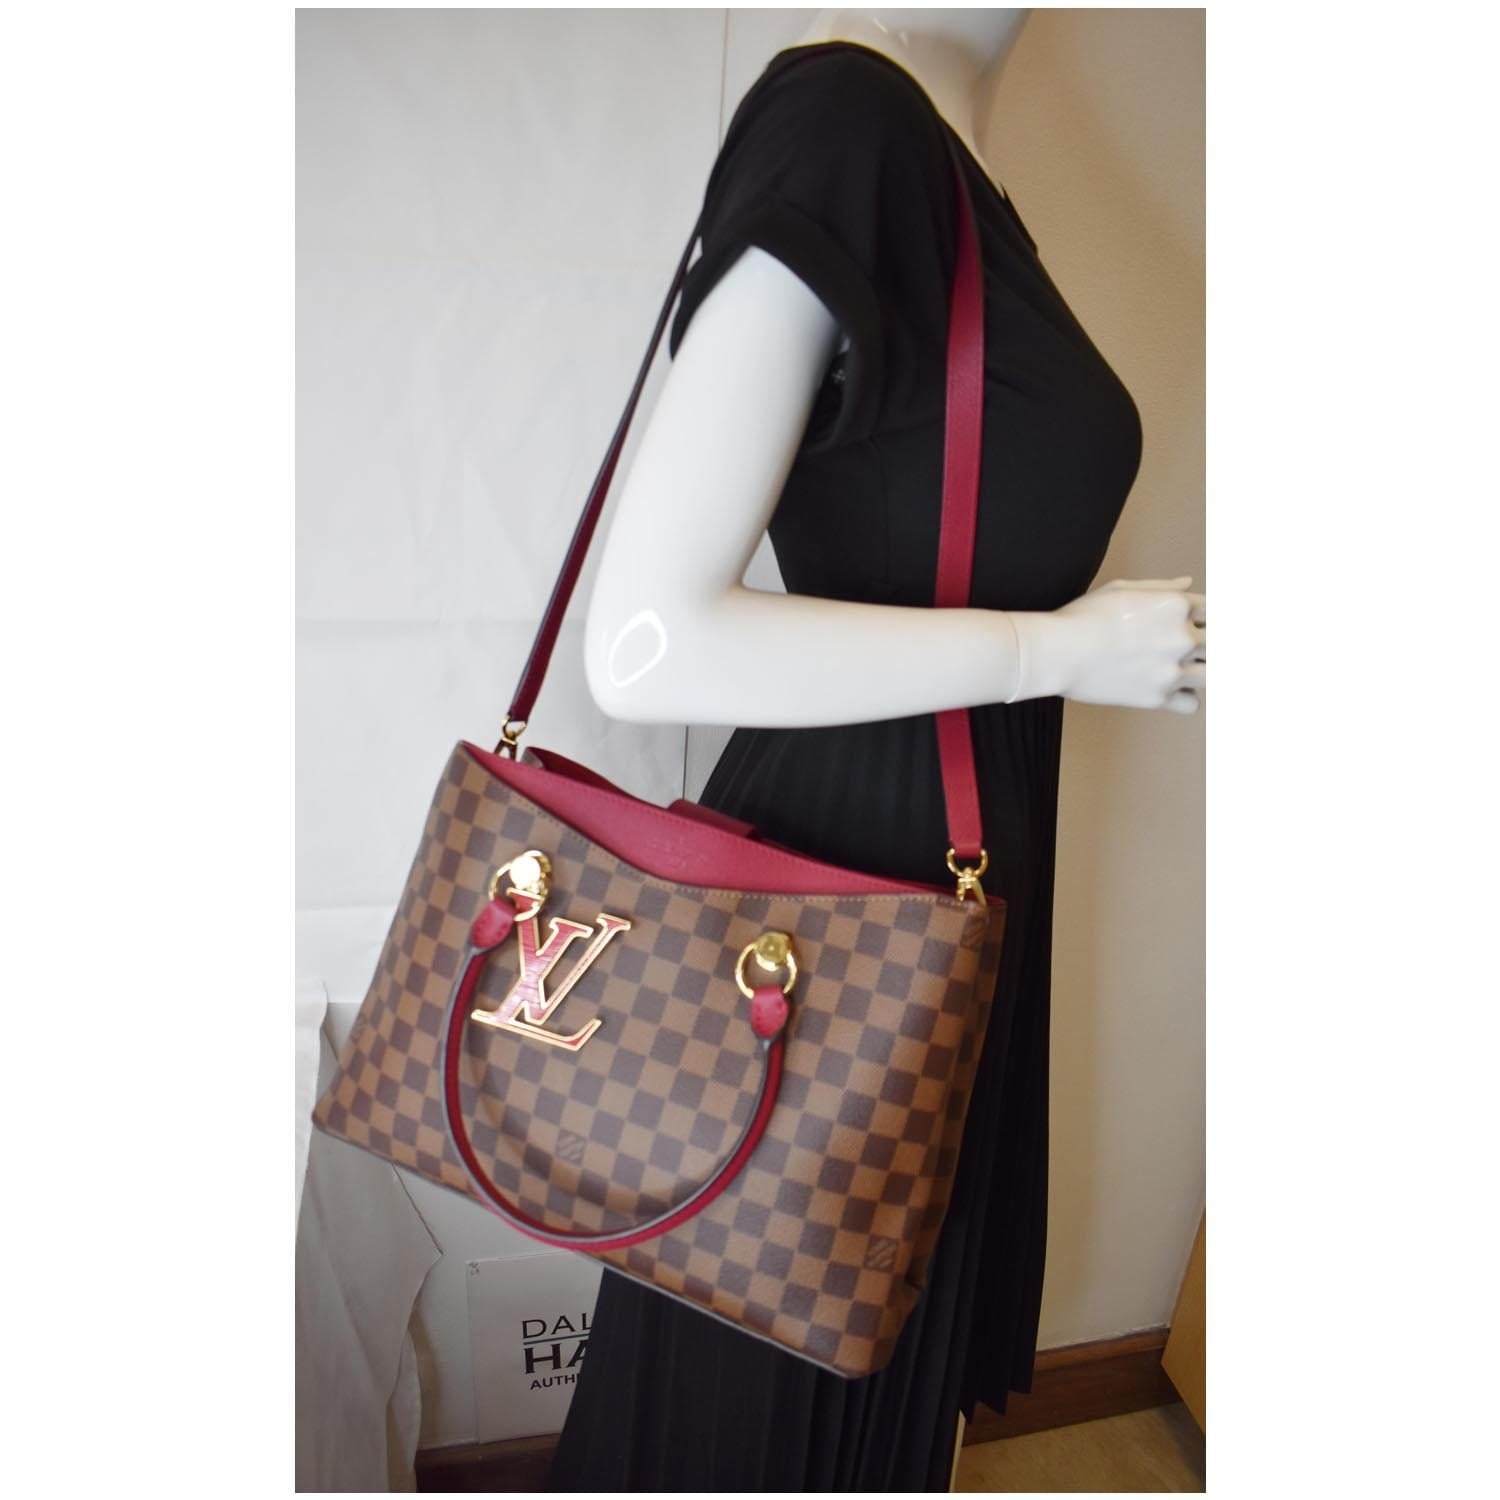 🔥LOUIS VUITTON Damier Ebene Siena PM Red Crossbody Tote Bag Italy ❤️RARE  GIFT!